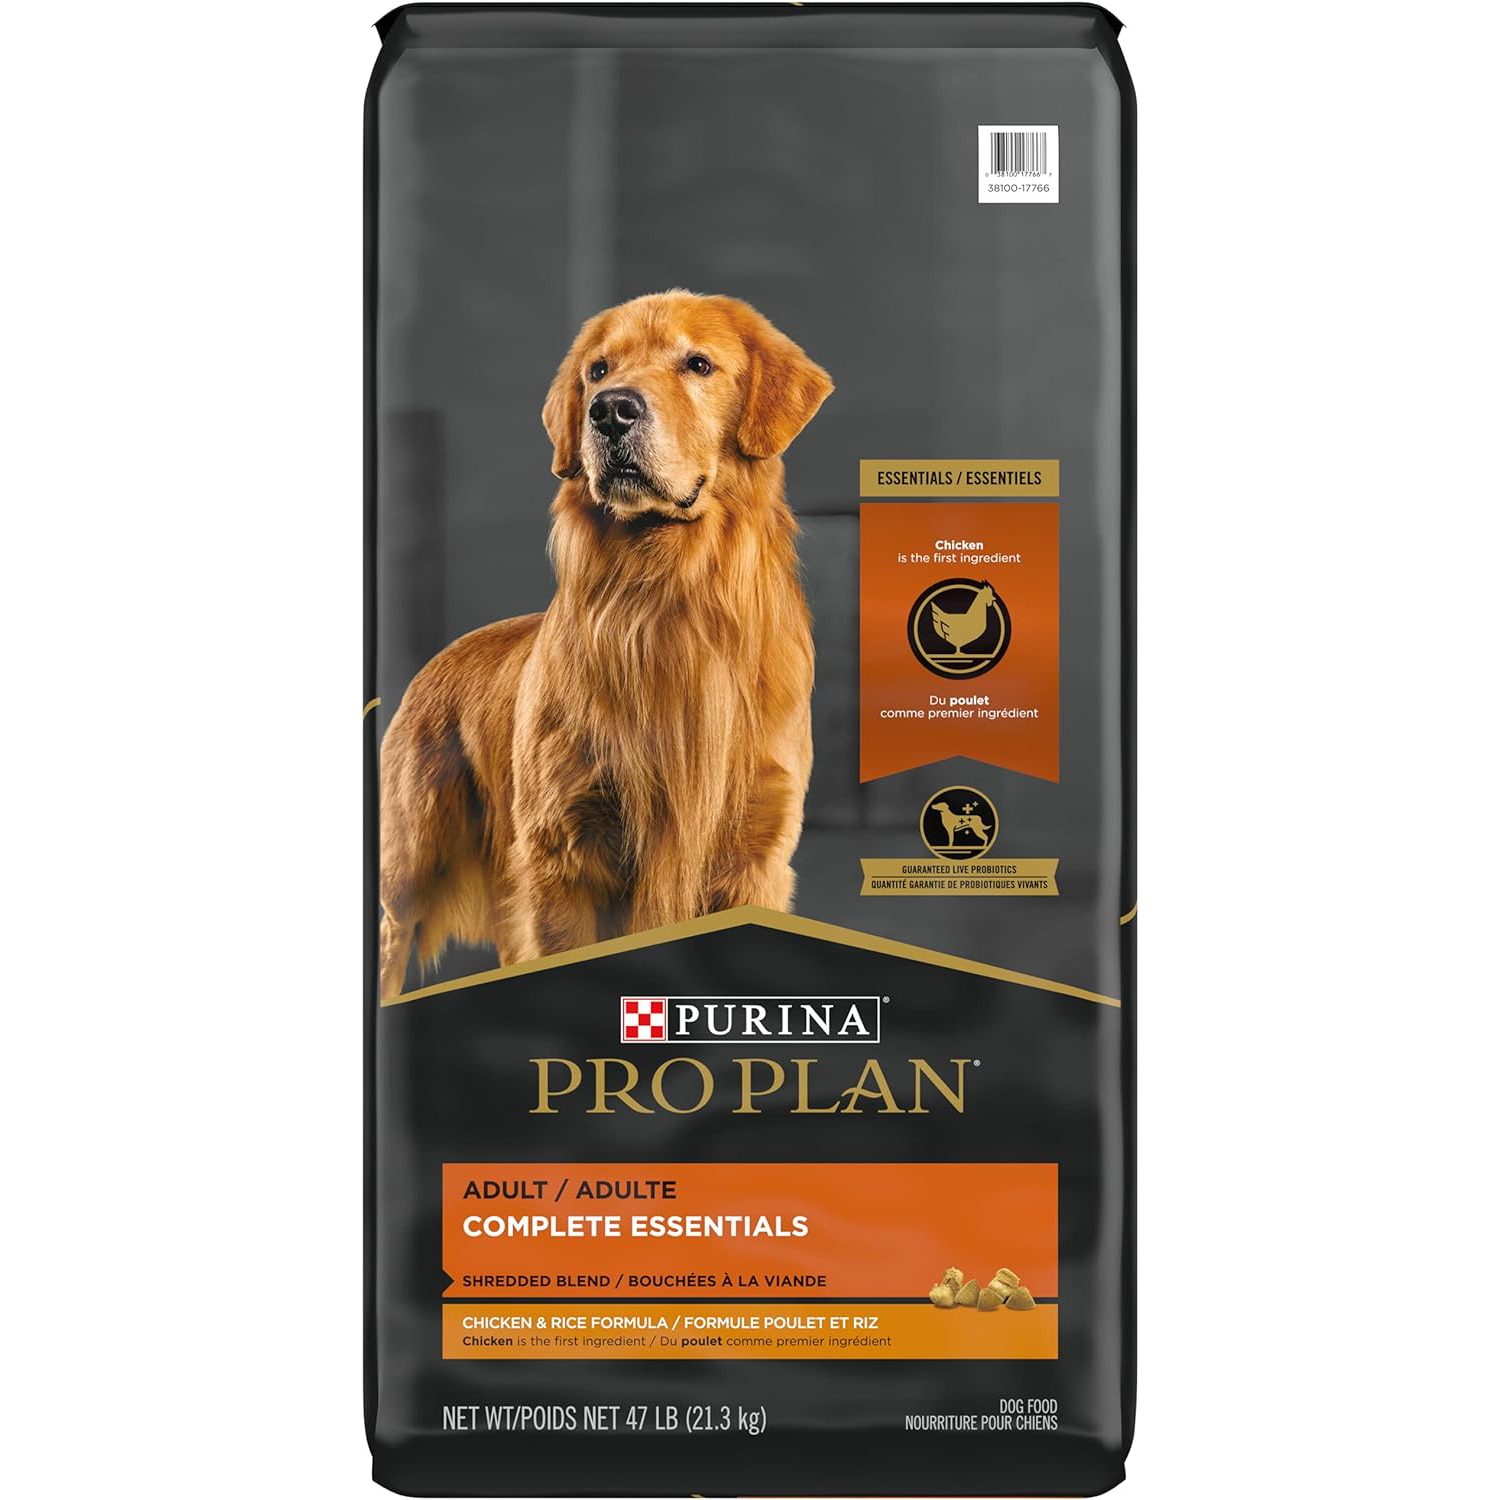 New Project Purina Pro Plan High Protein Dog Food With Probiotics for Dogs 